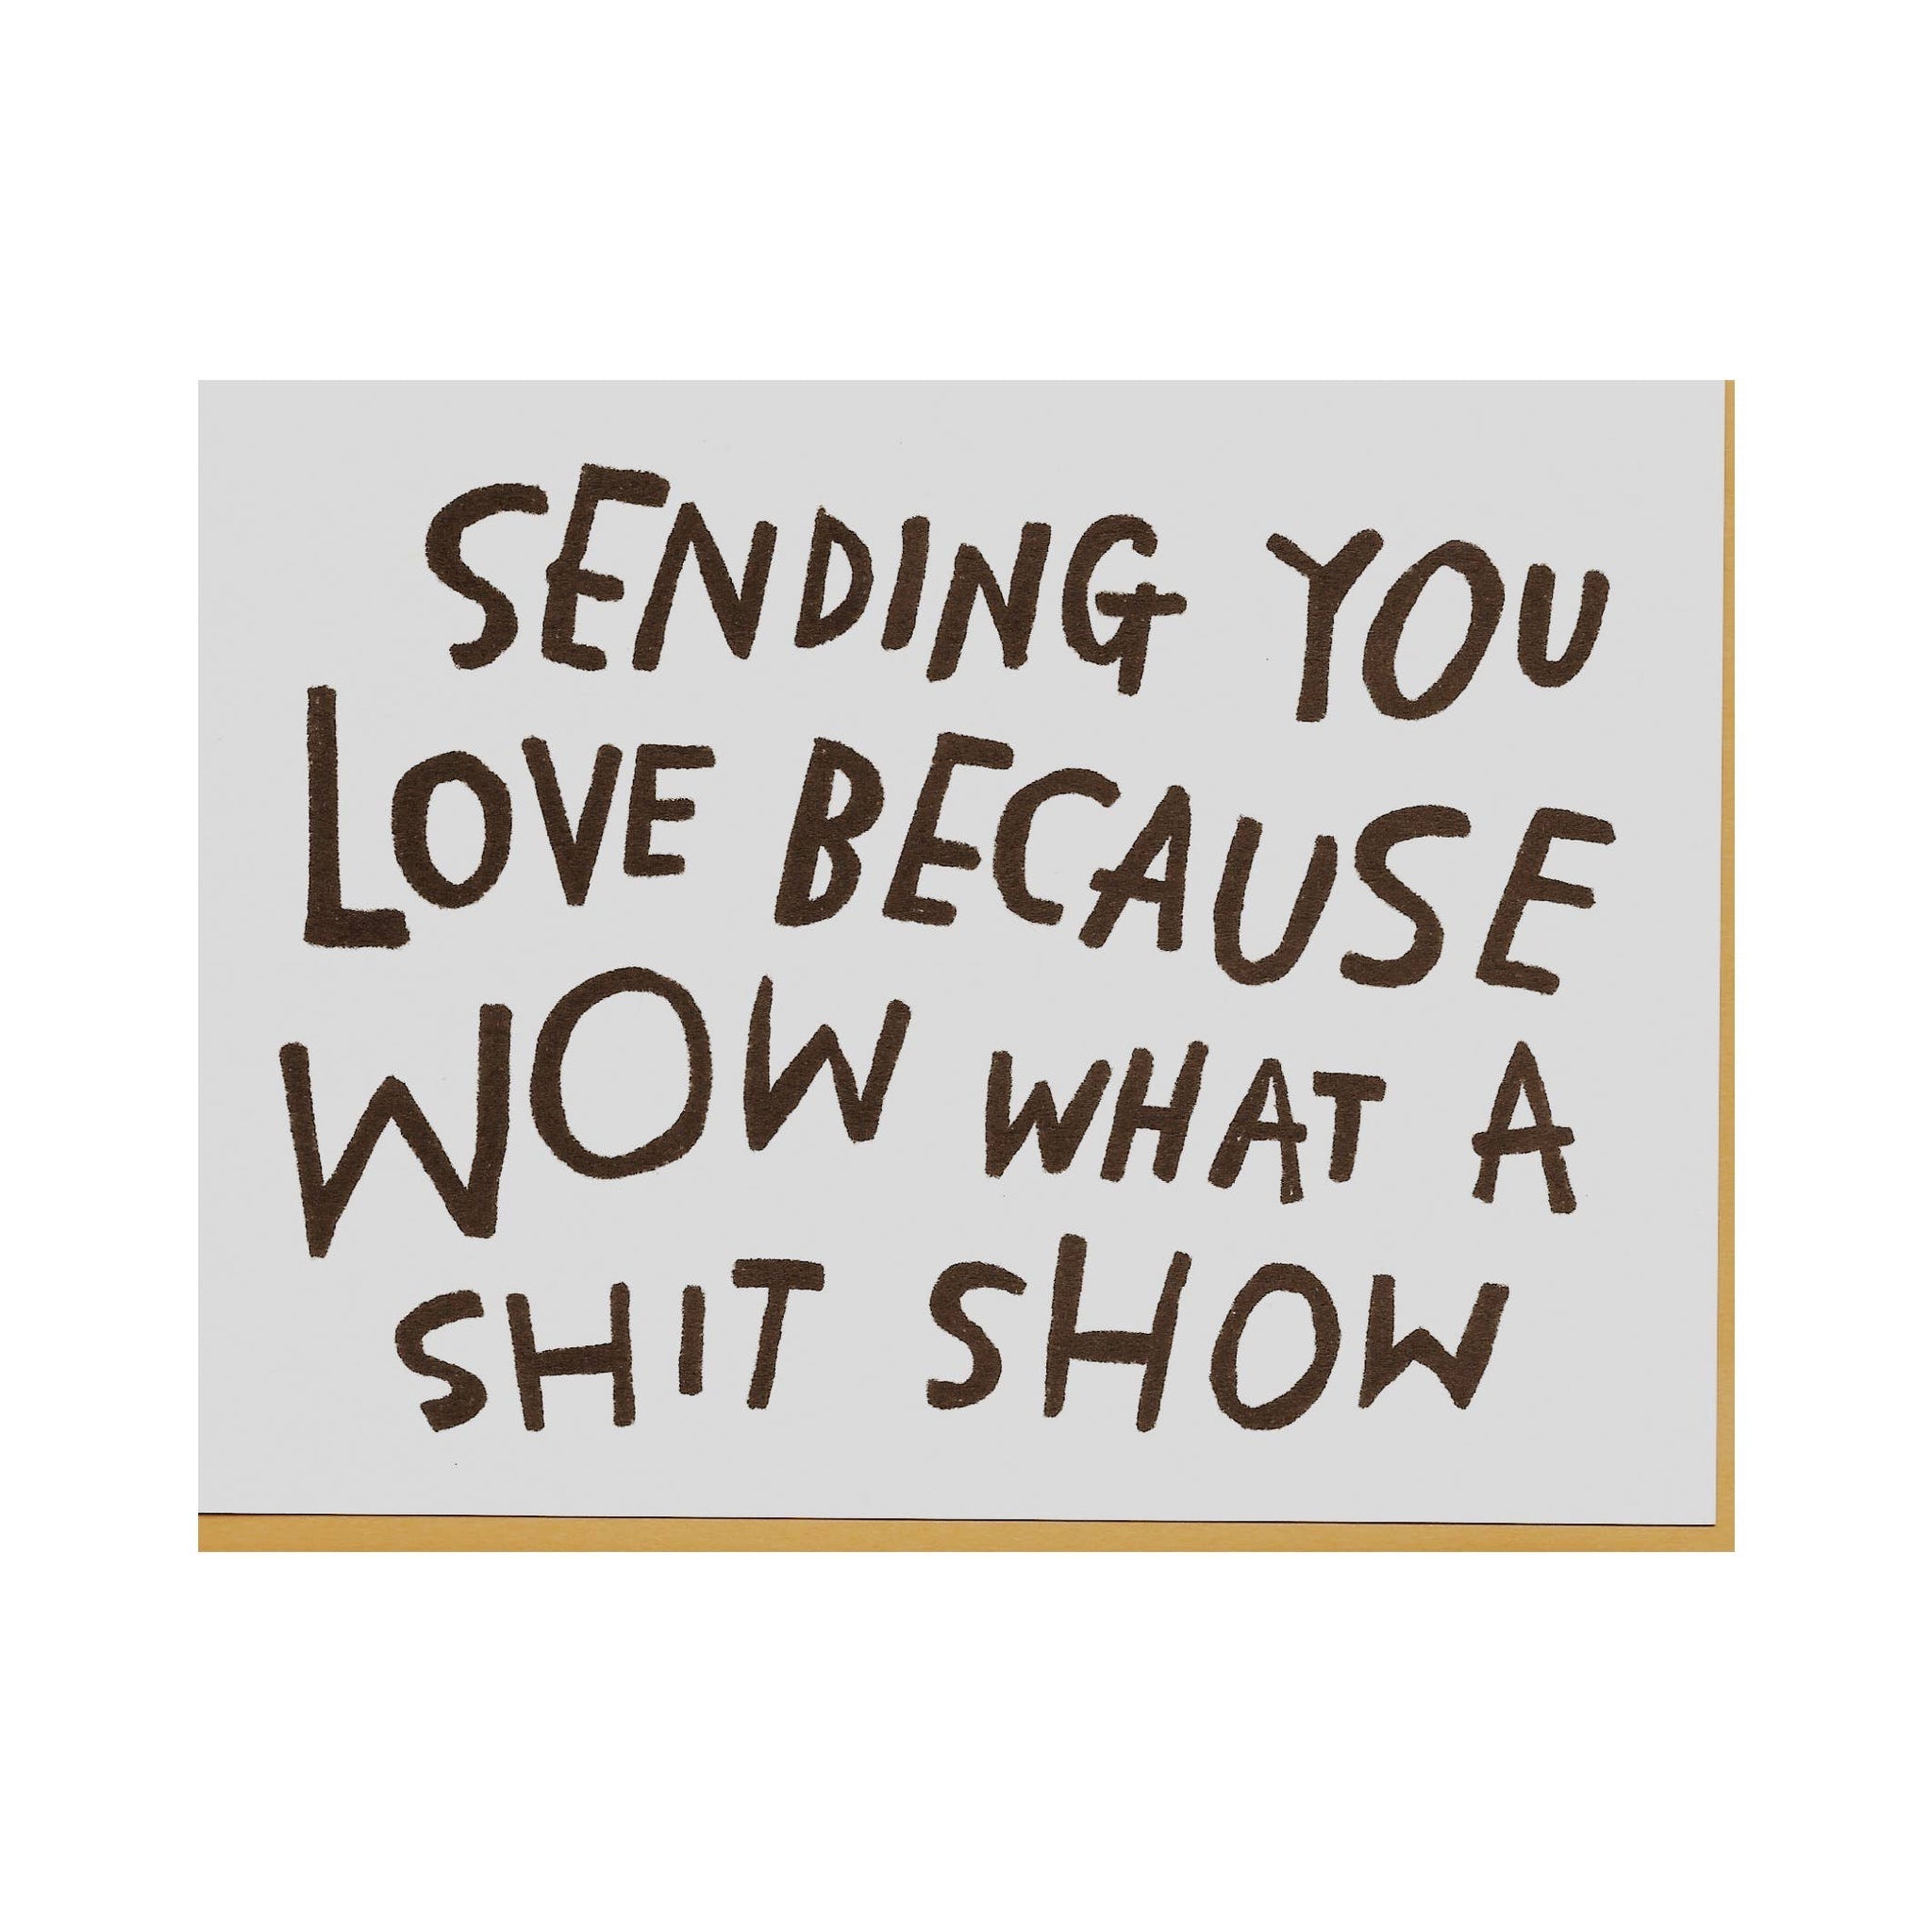 WHAT A SHIT SHOW Greeting Card